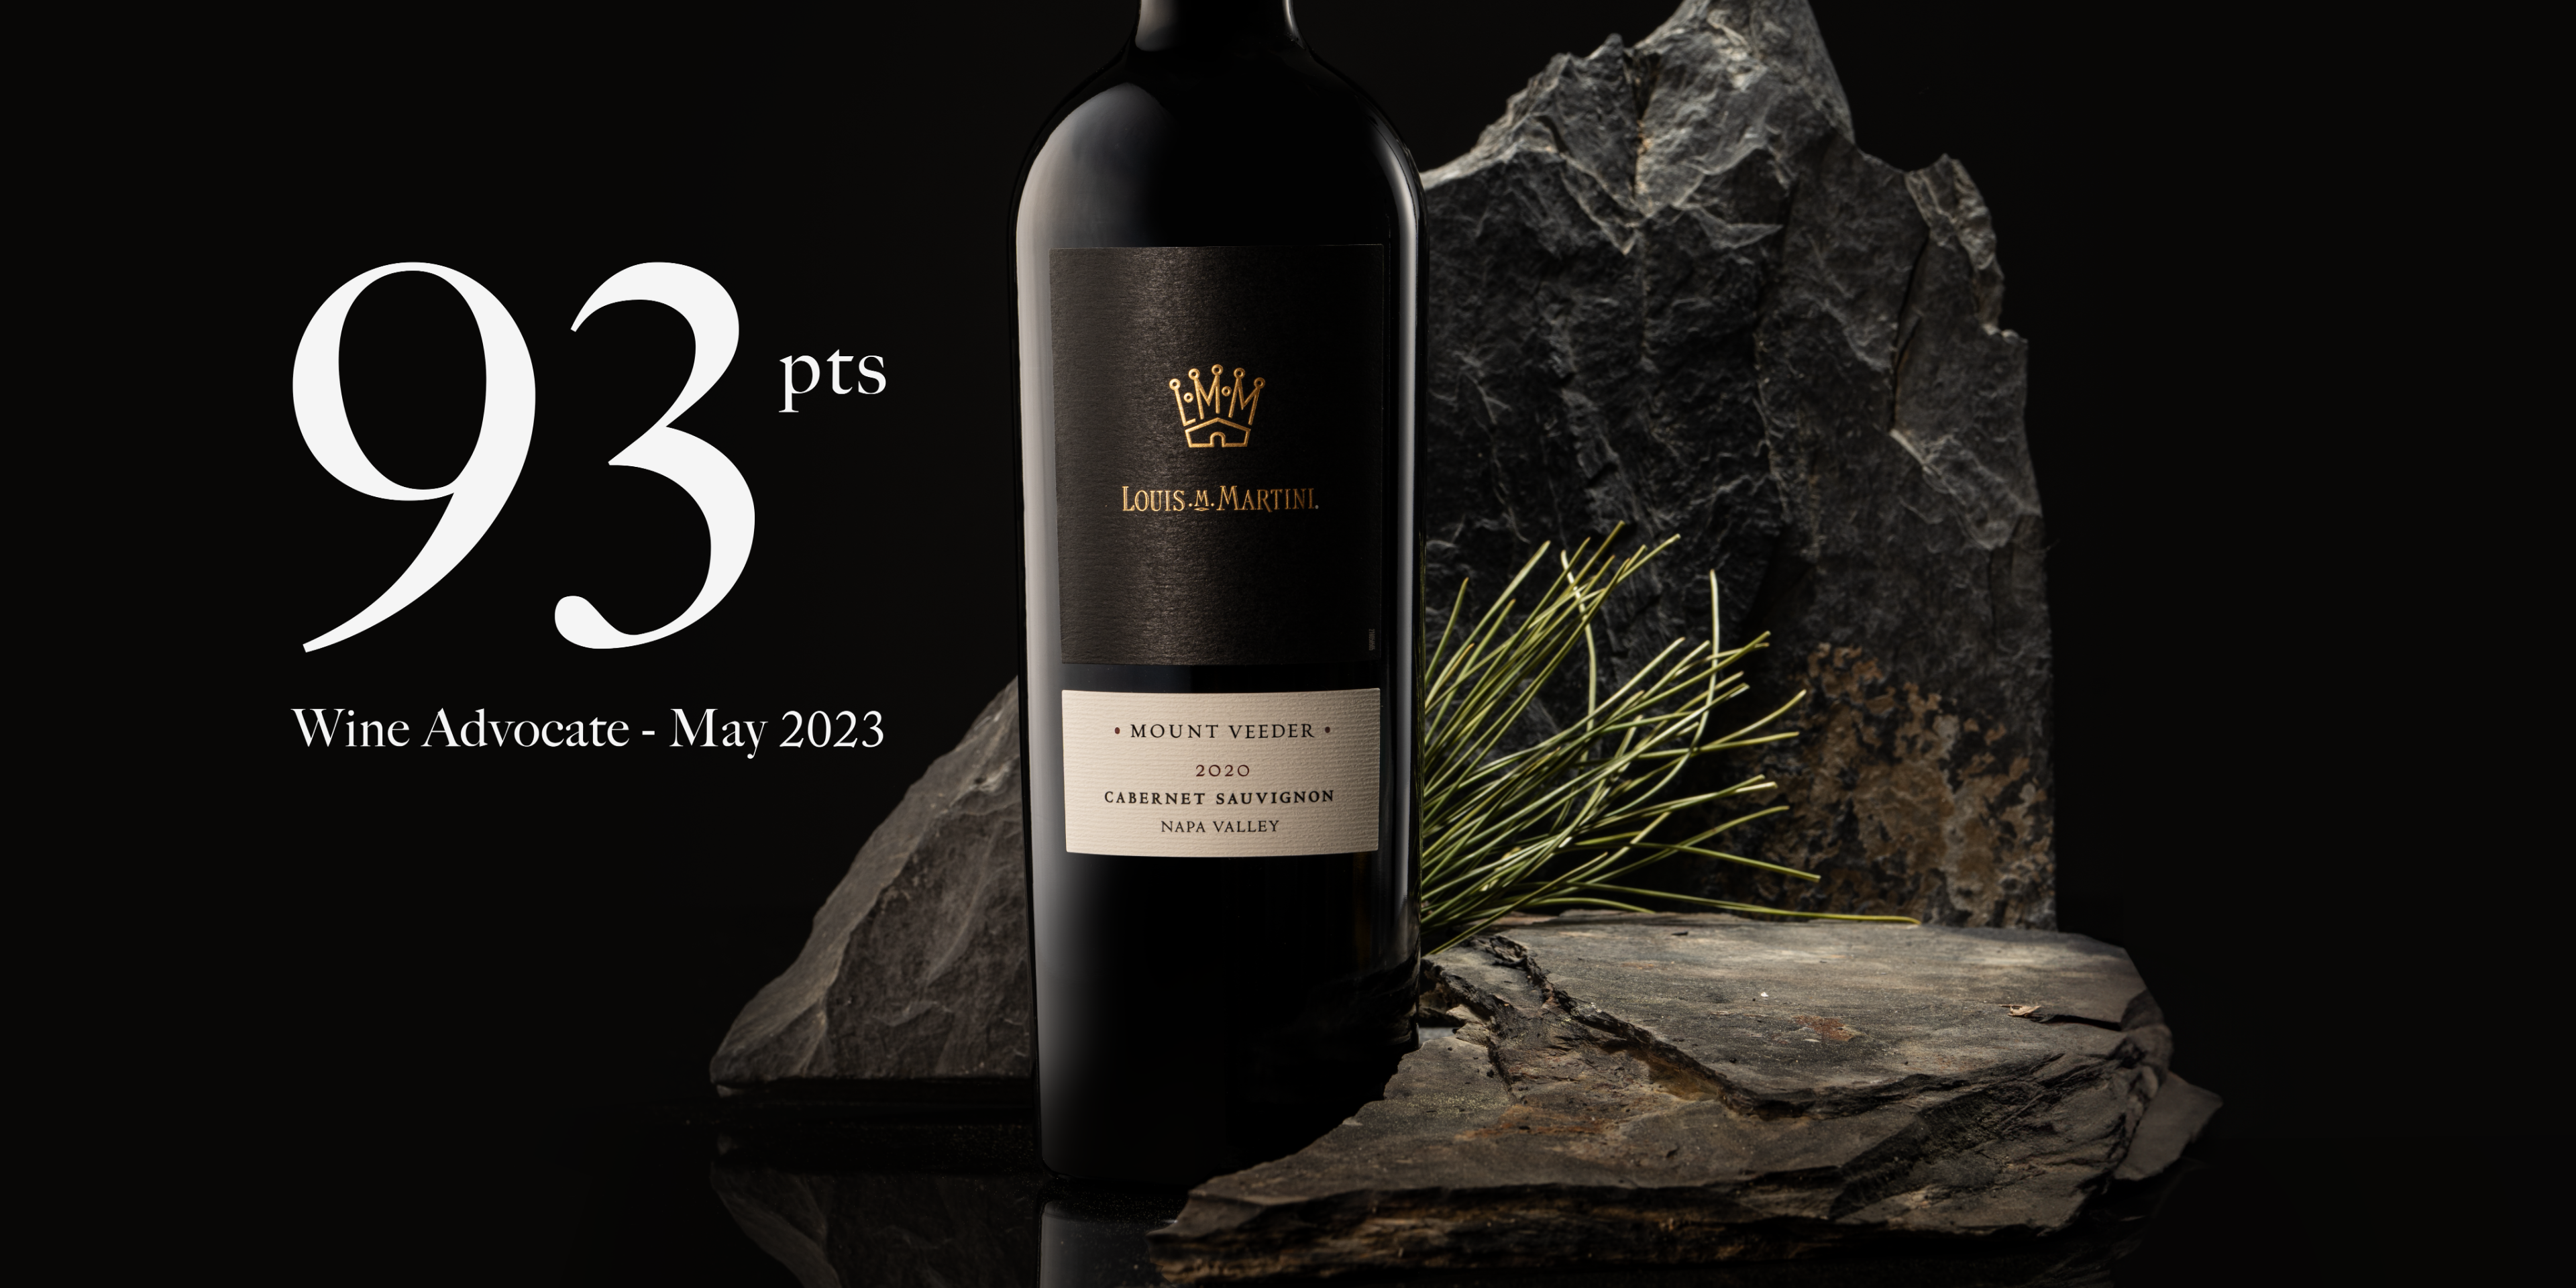 Bottle of V20 Mount Veeder Cabernet Sauvignon with 93pts accolade call out